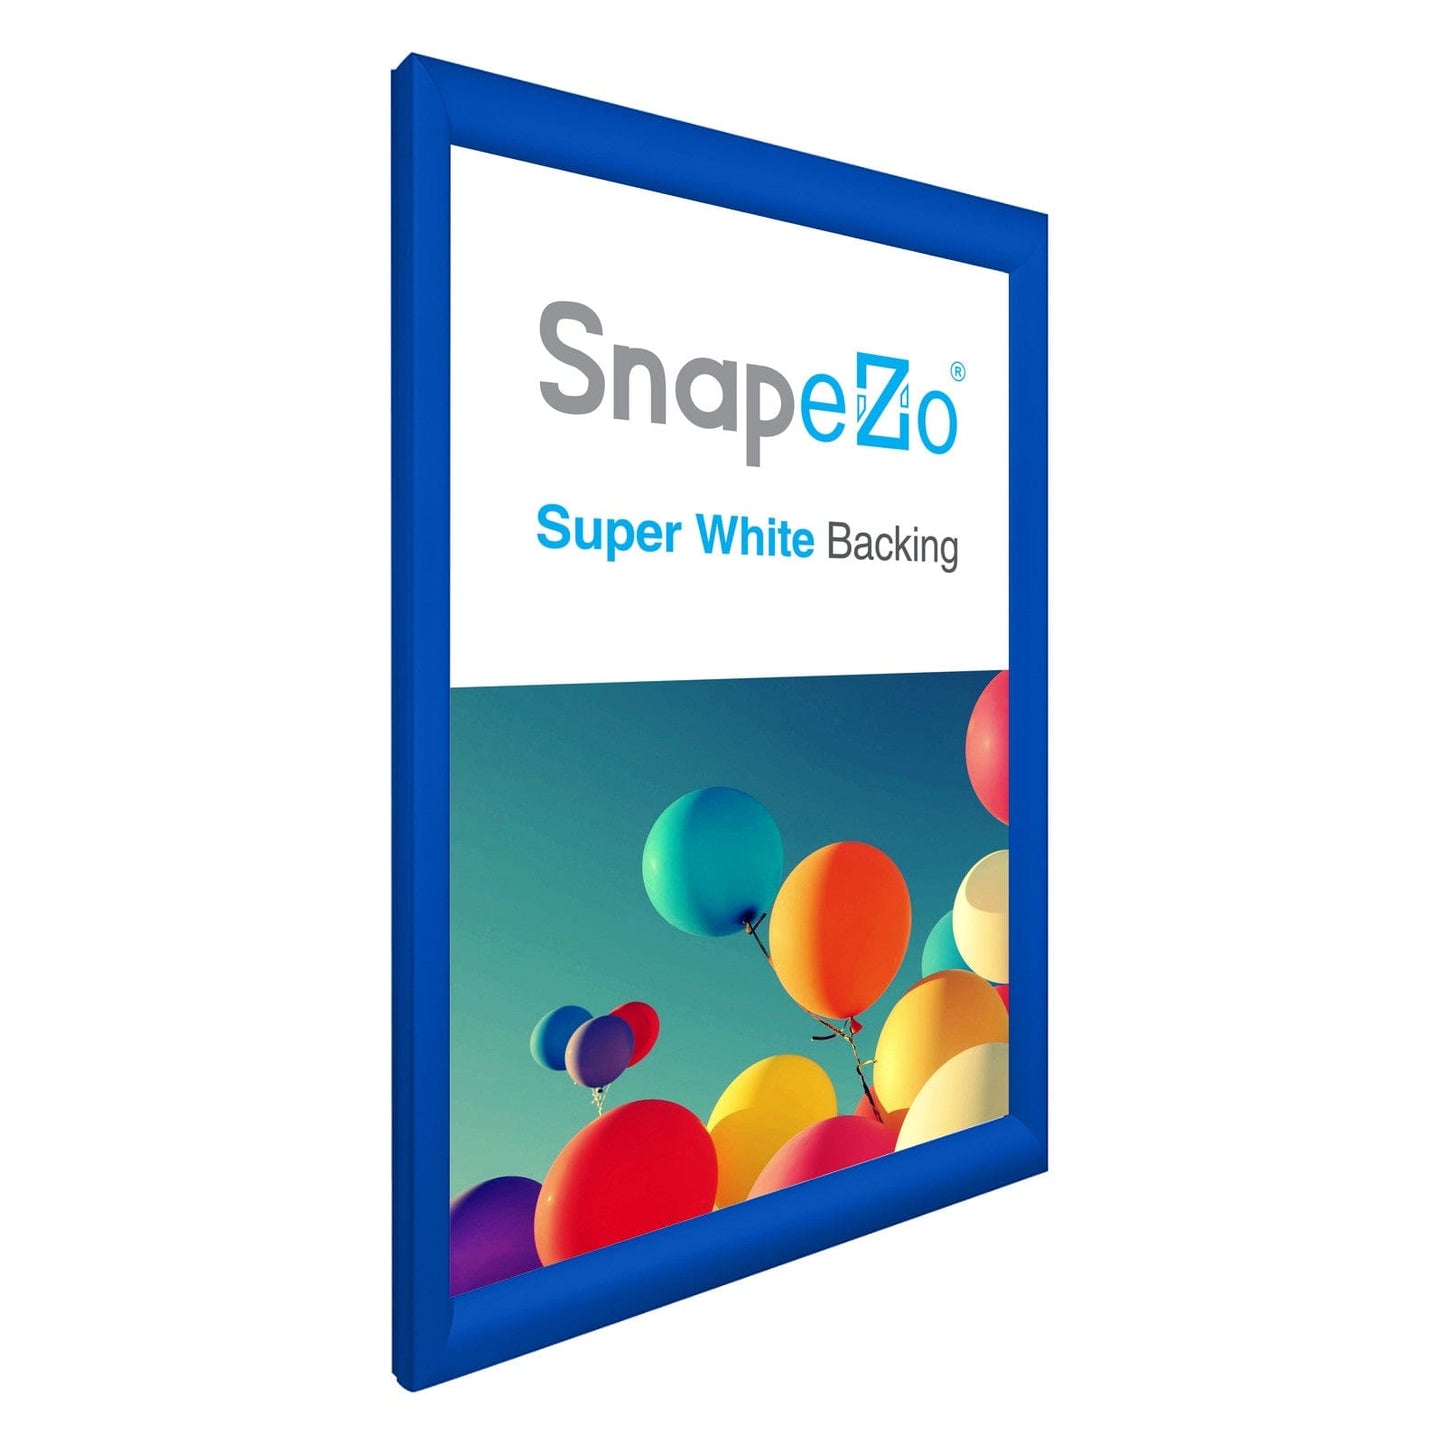 15x22 Blue SnapeZo® Snap Frame - 1.2" Profile - Snap Frames Direct